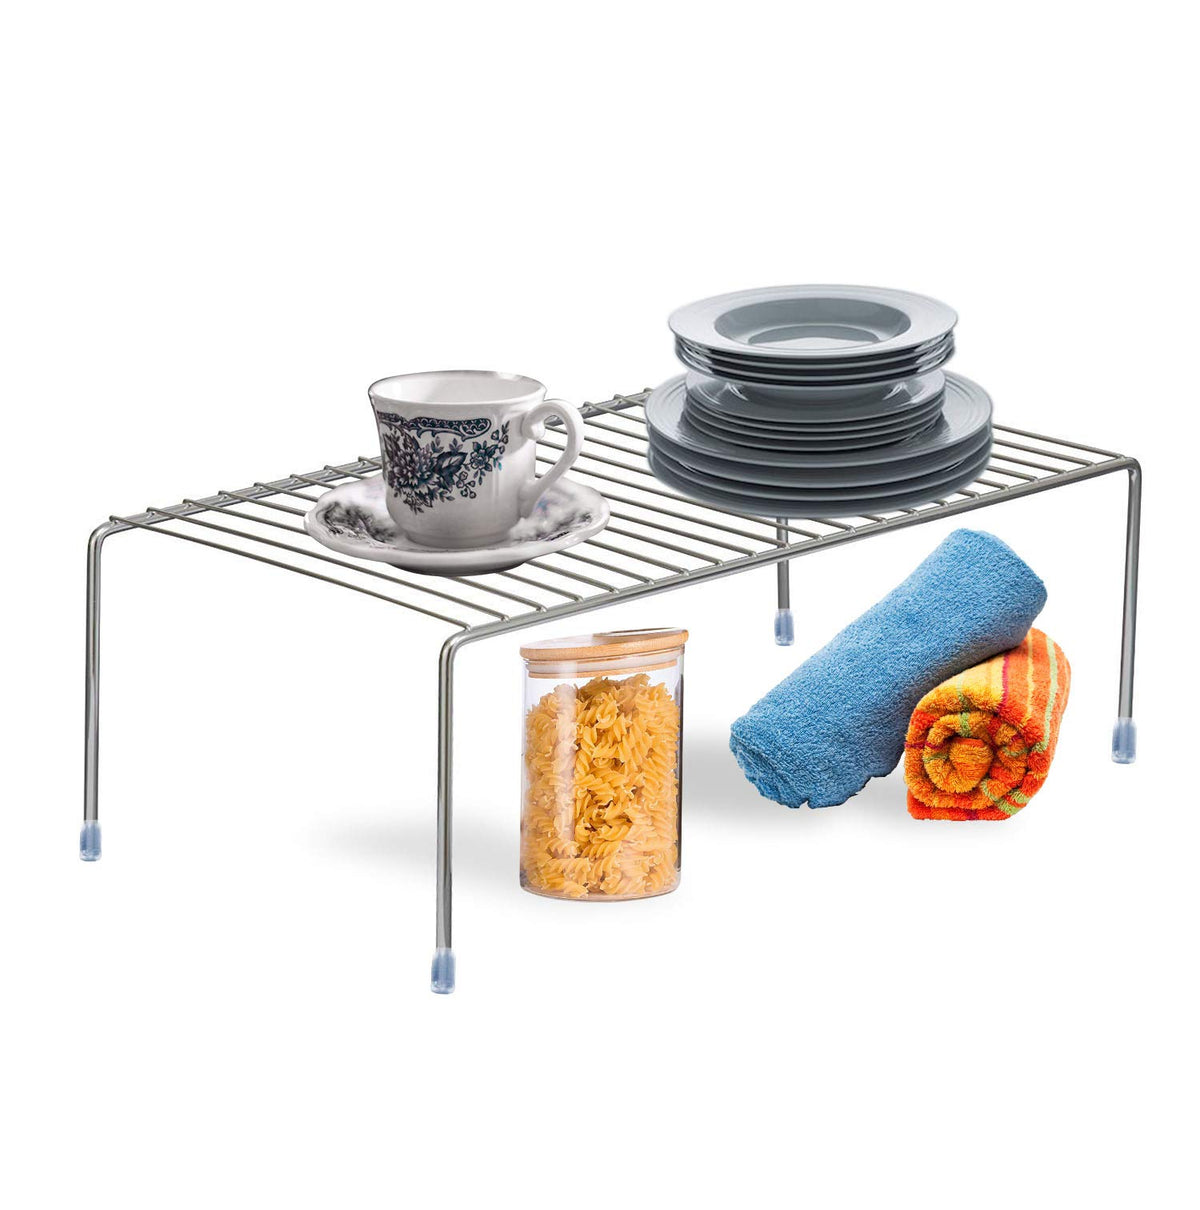 Plantex Stainless Steel Plate Stand/Saucer Stand/Utensil Rack